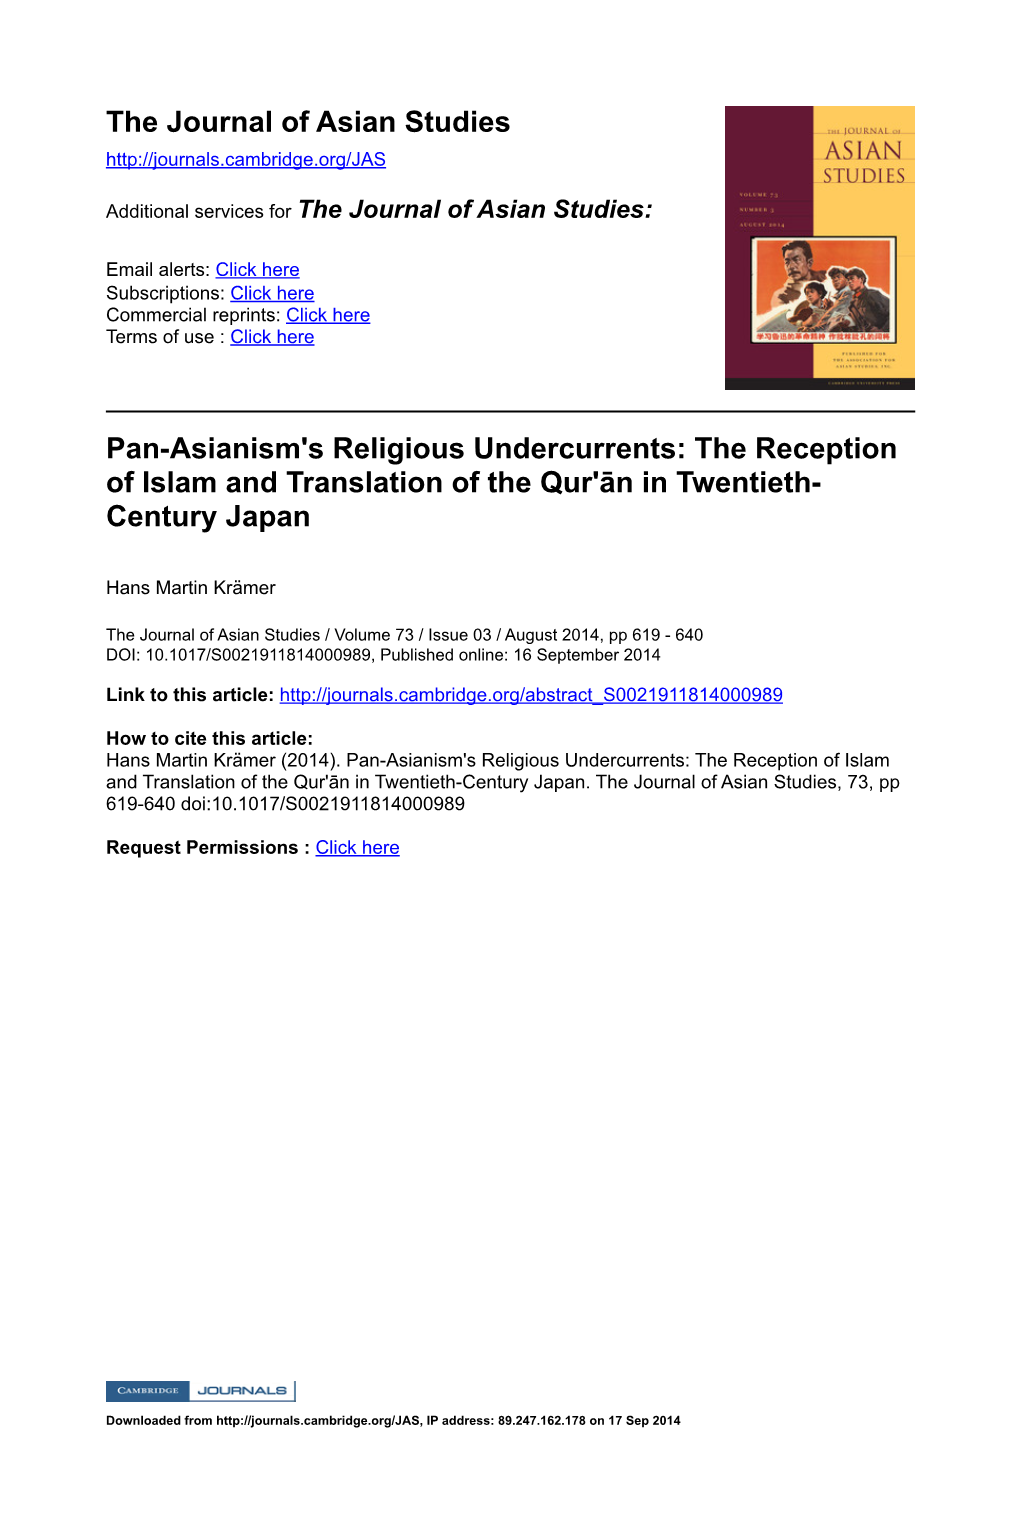 The Journal of Asian Studies Pan-Asianism's Religious